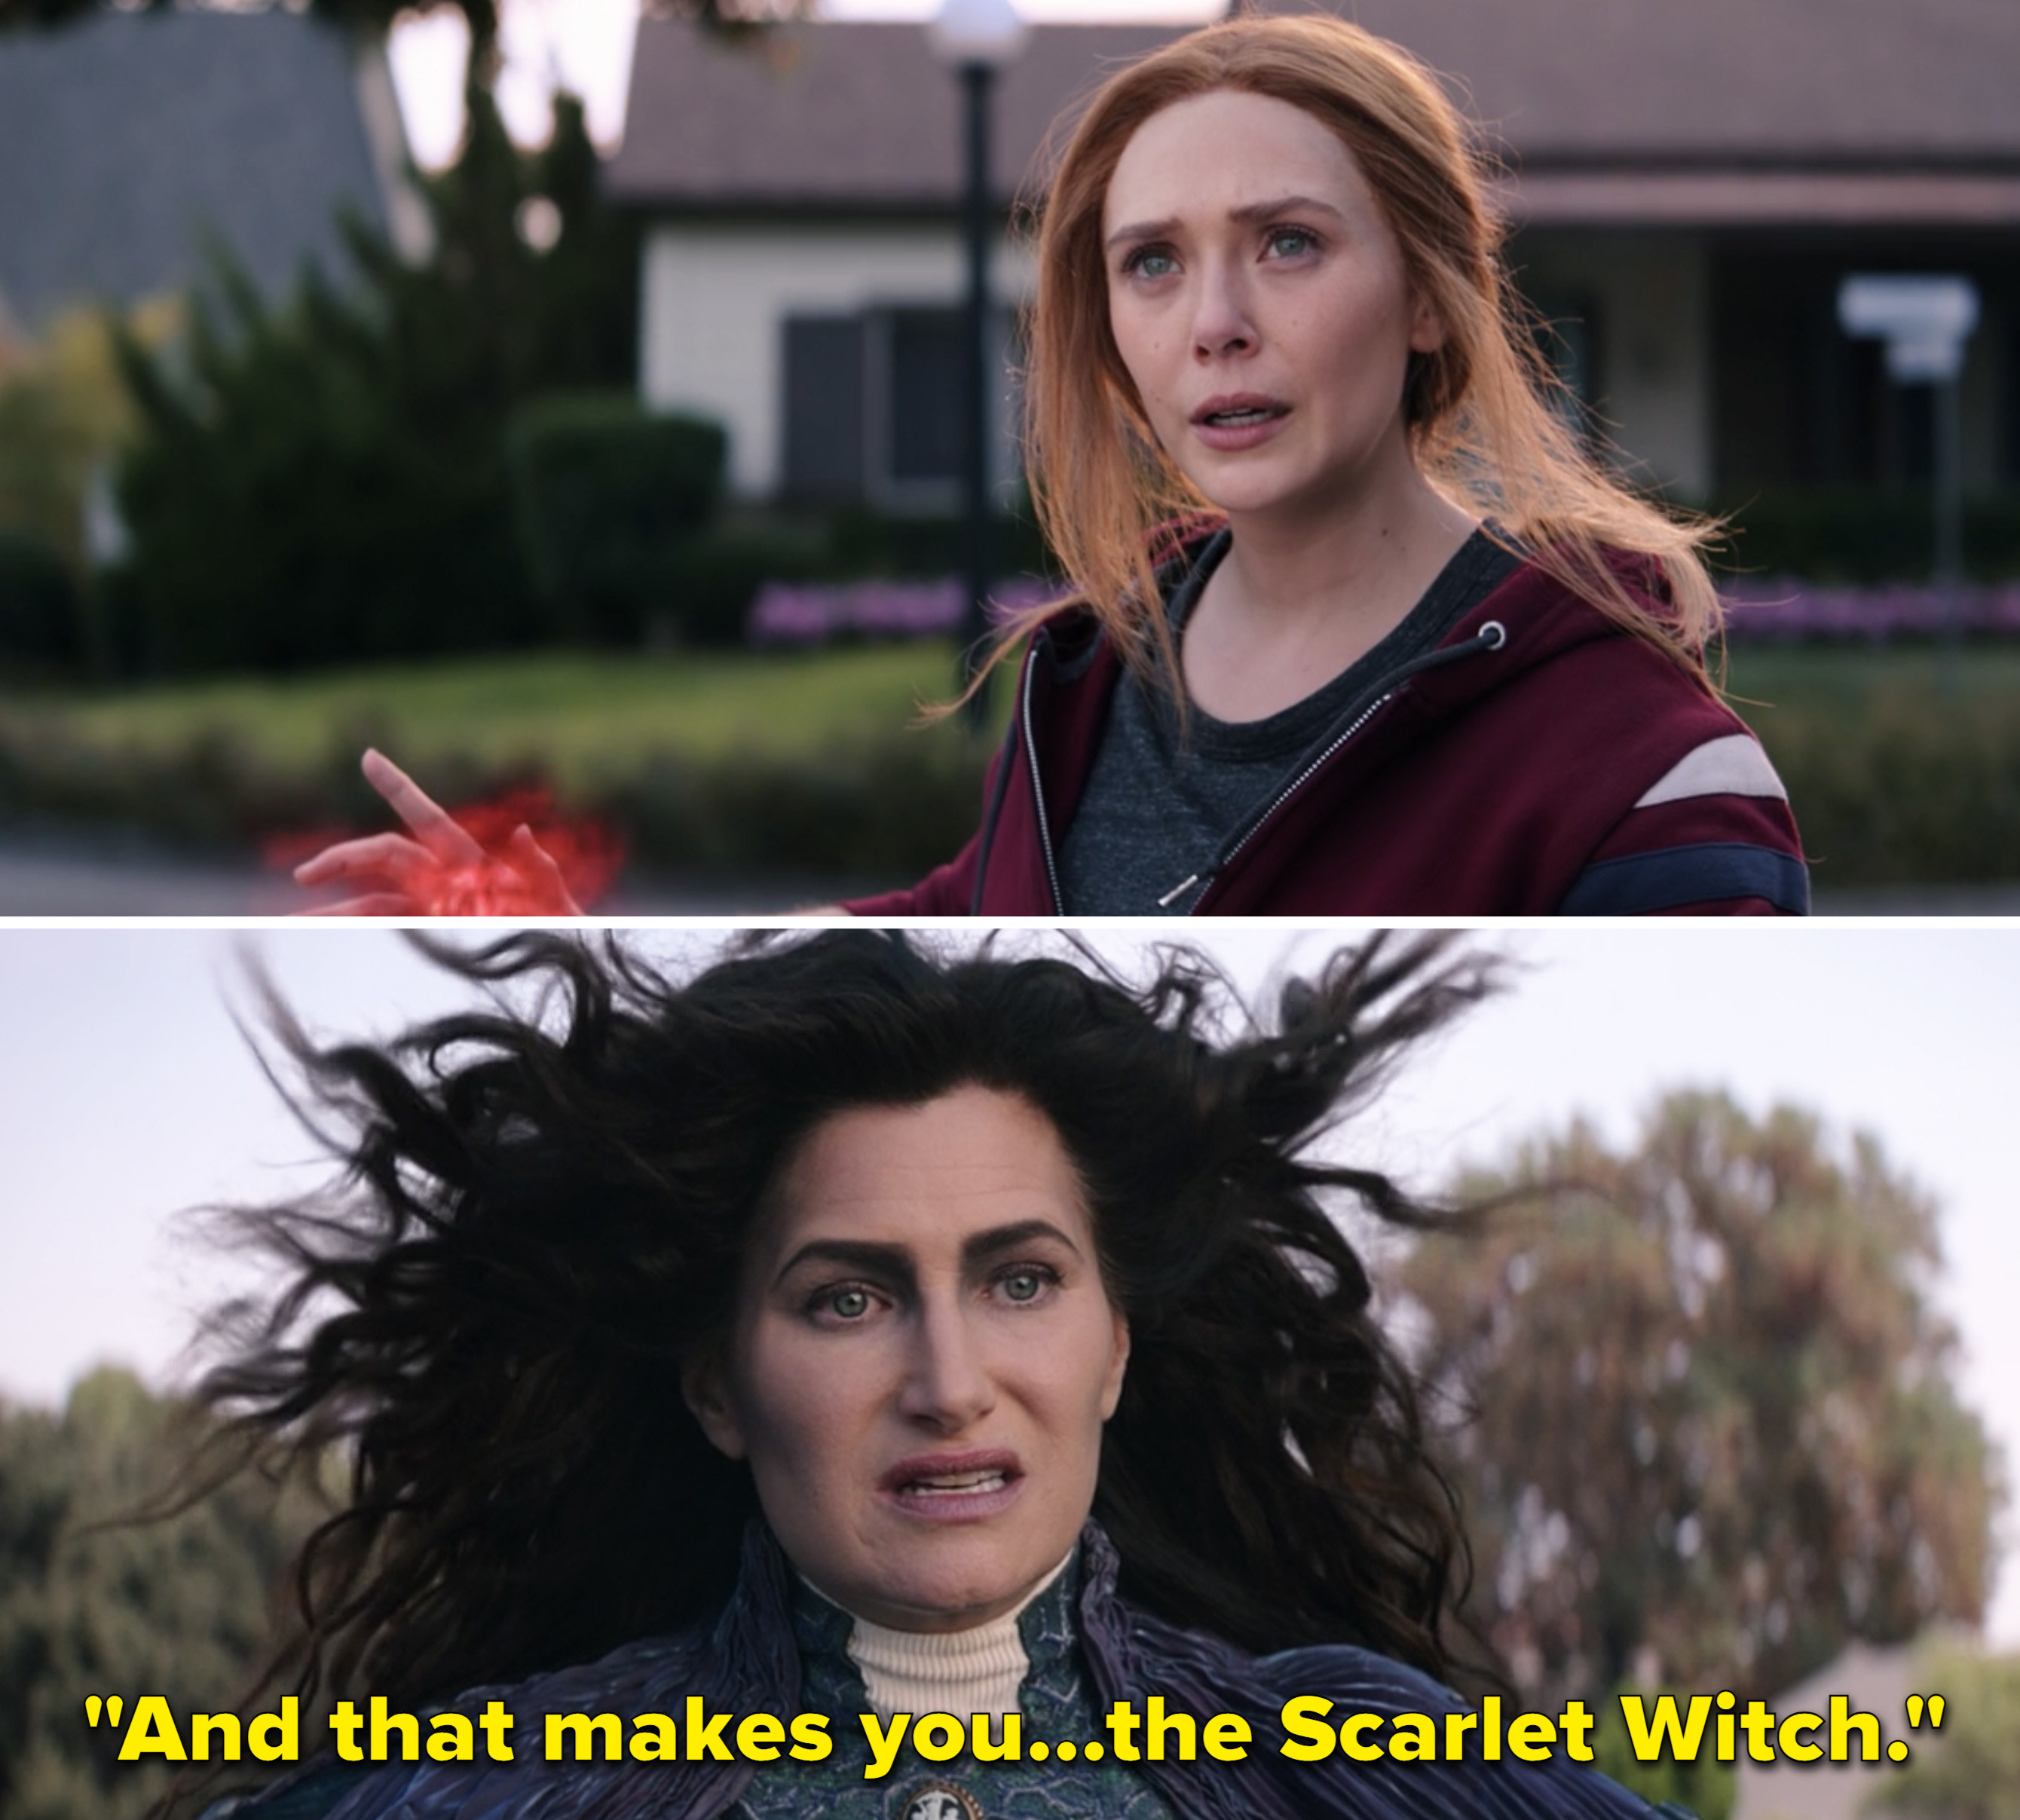 Agatha telling Wanda, &quot;And that makes you...the Scarlet Witch&quot;